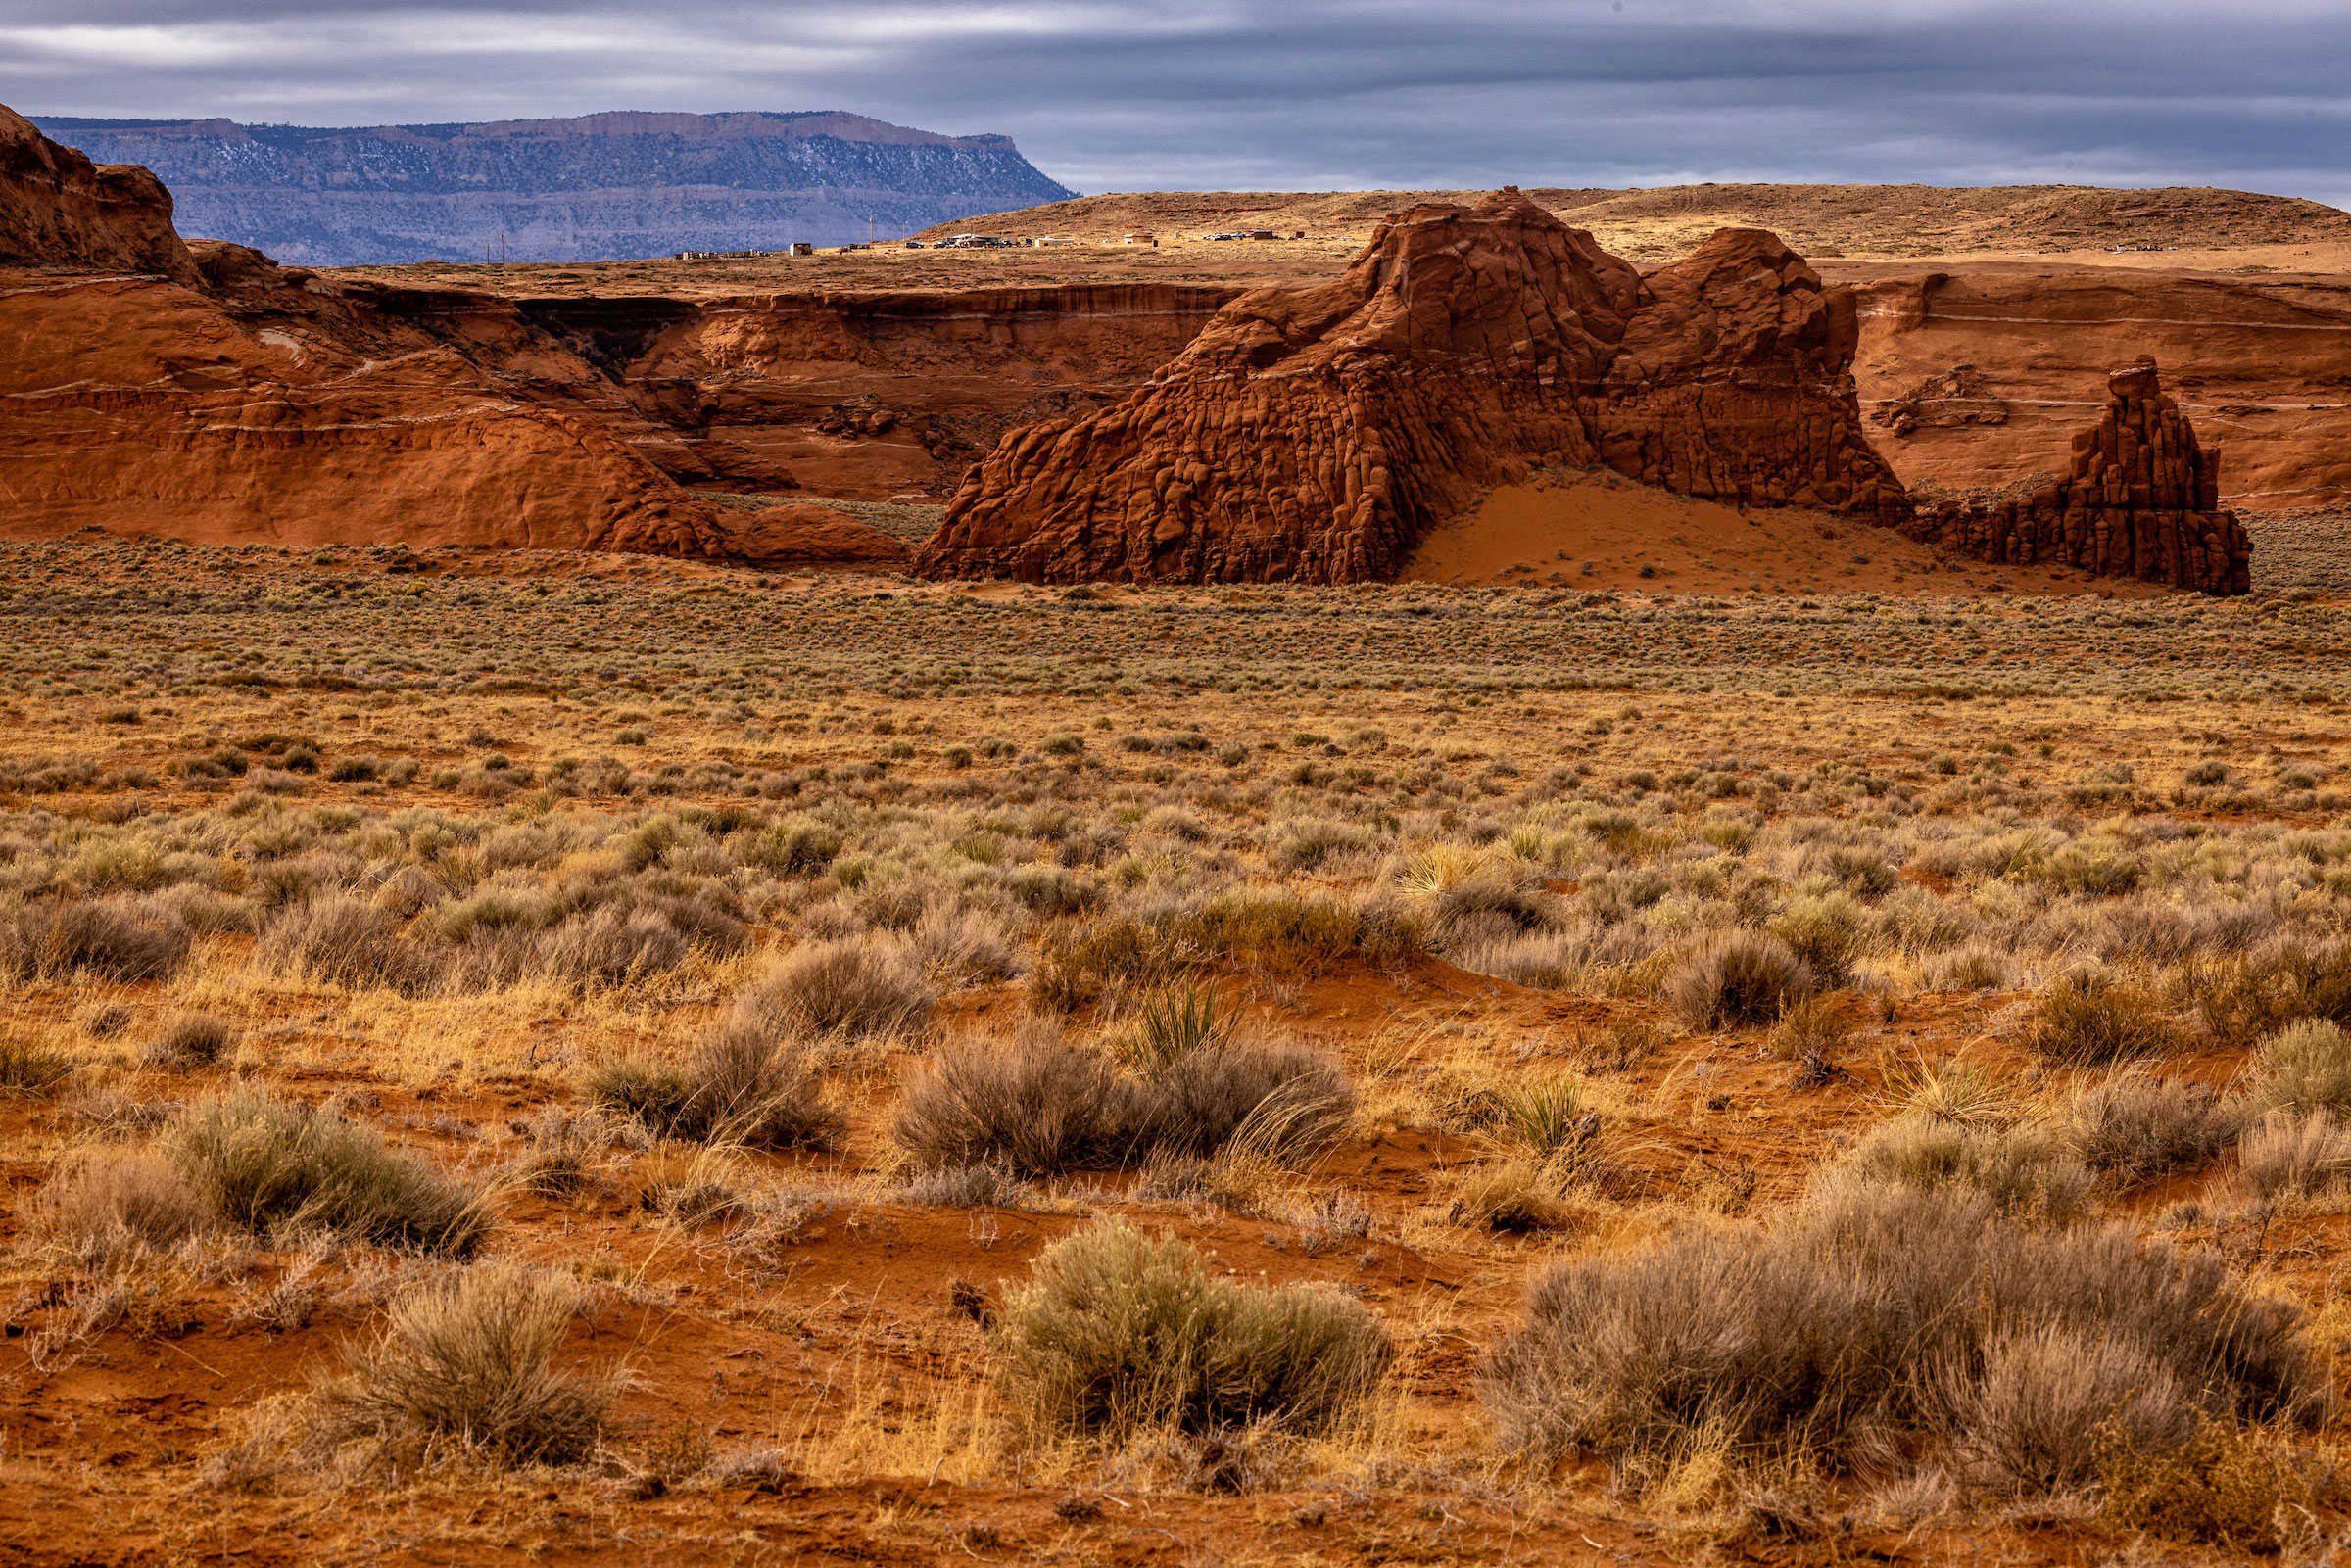 Structures and vehicles can barely be seen in the distance on a mesa in northern Arizona with sculpted red hills in the foreground